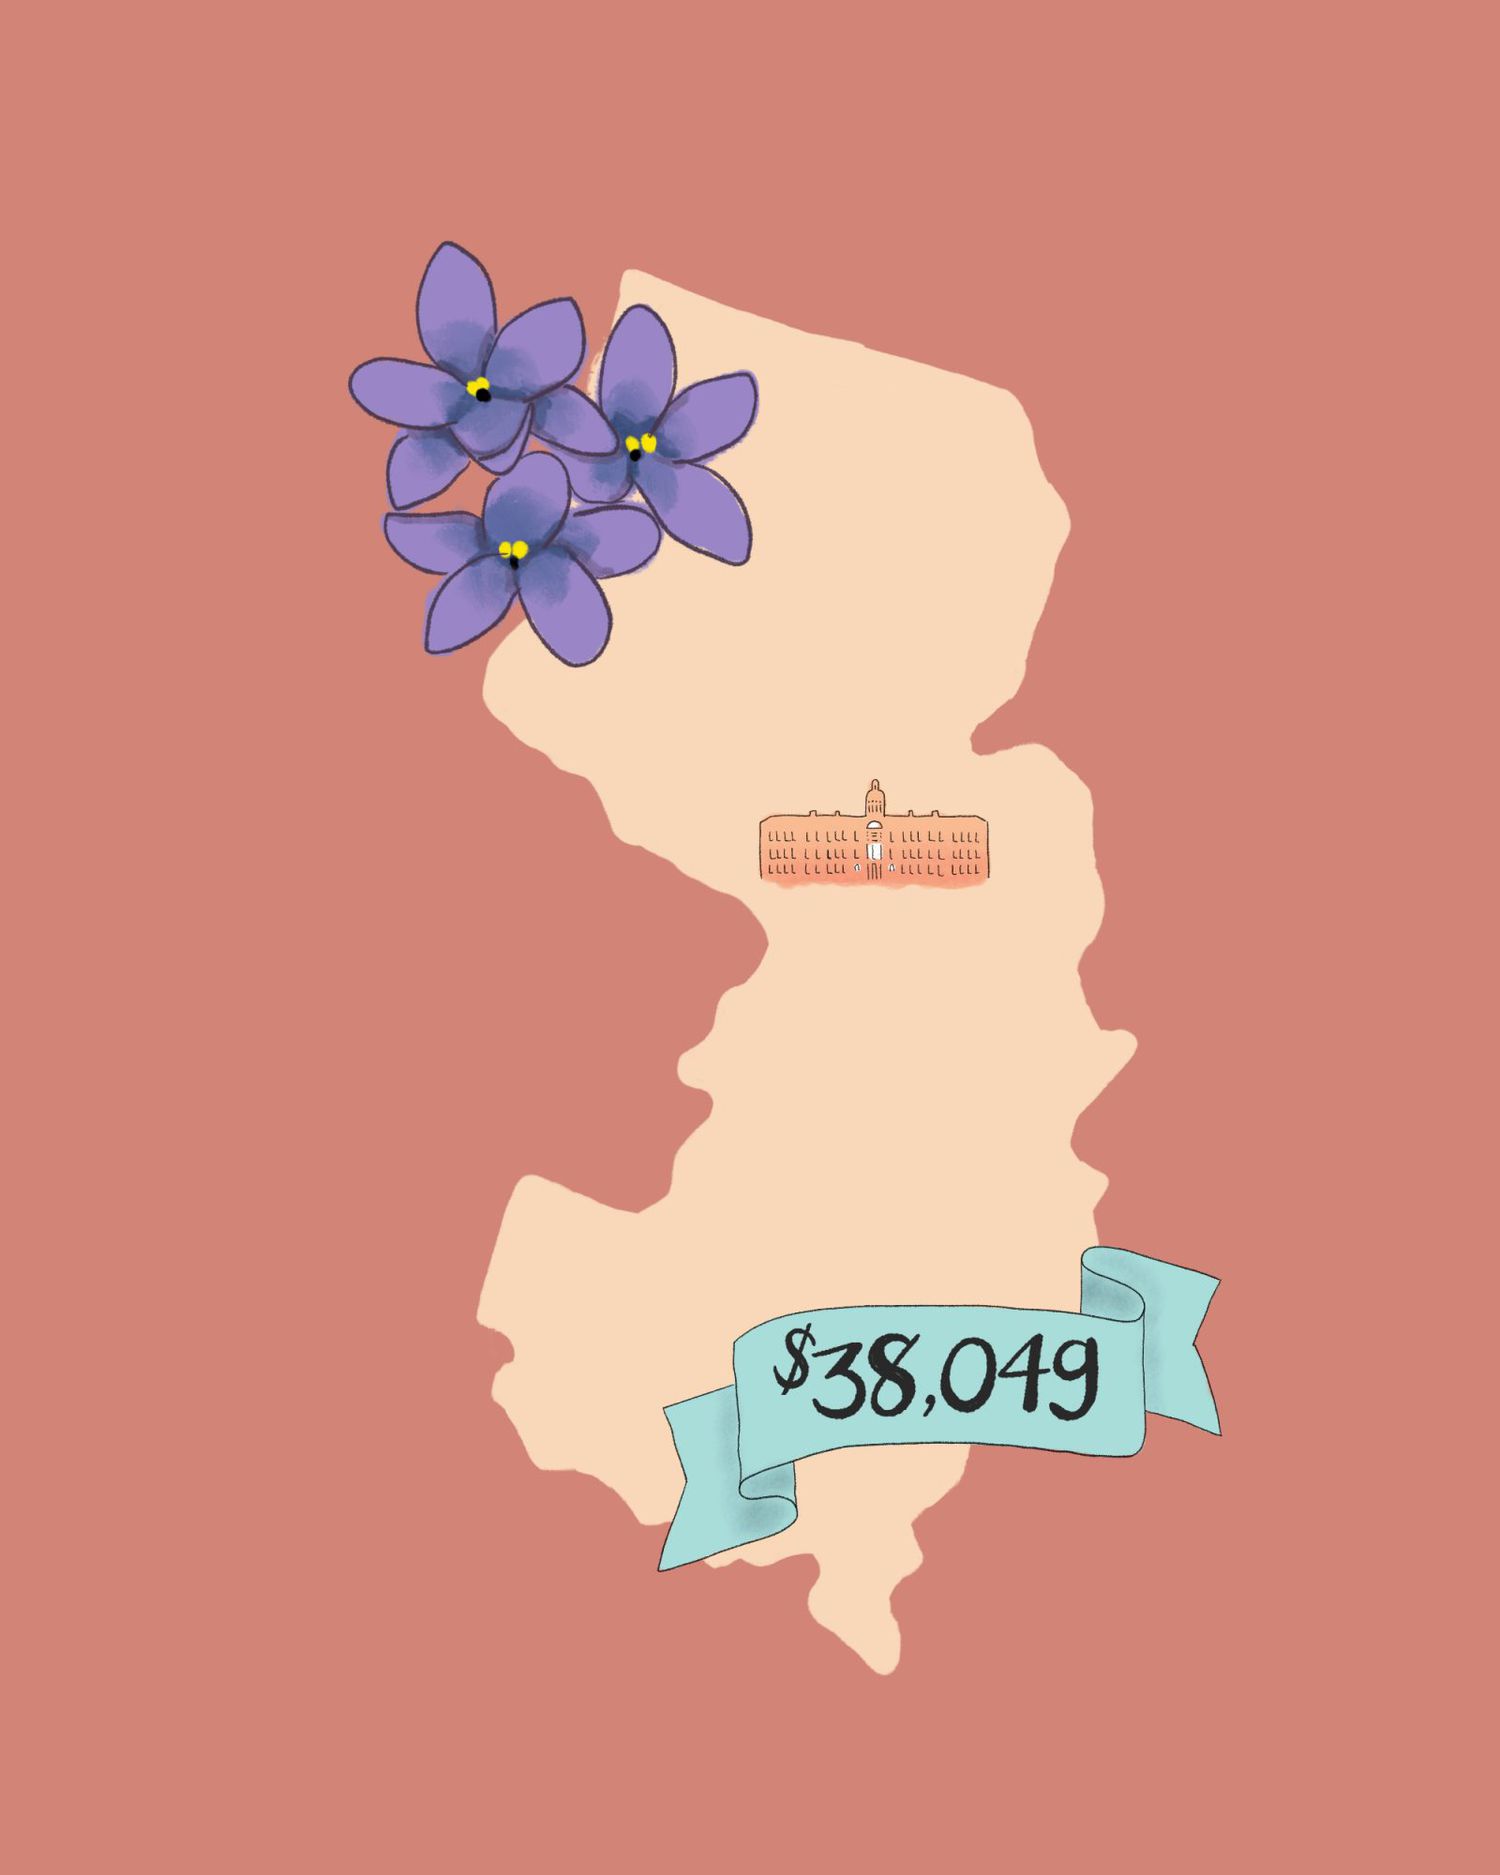 state wedding costs illustration new jersey